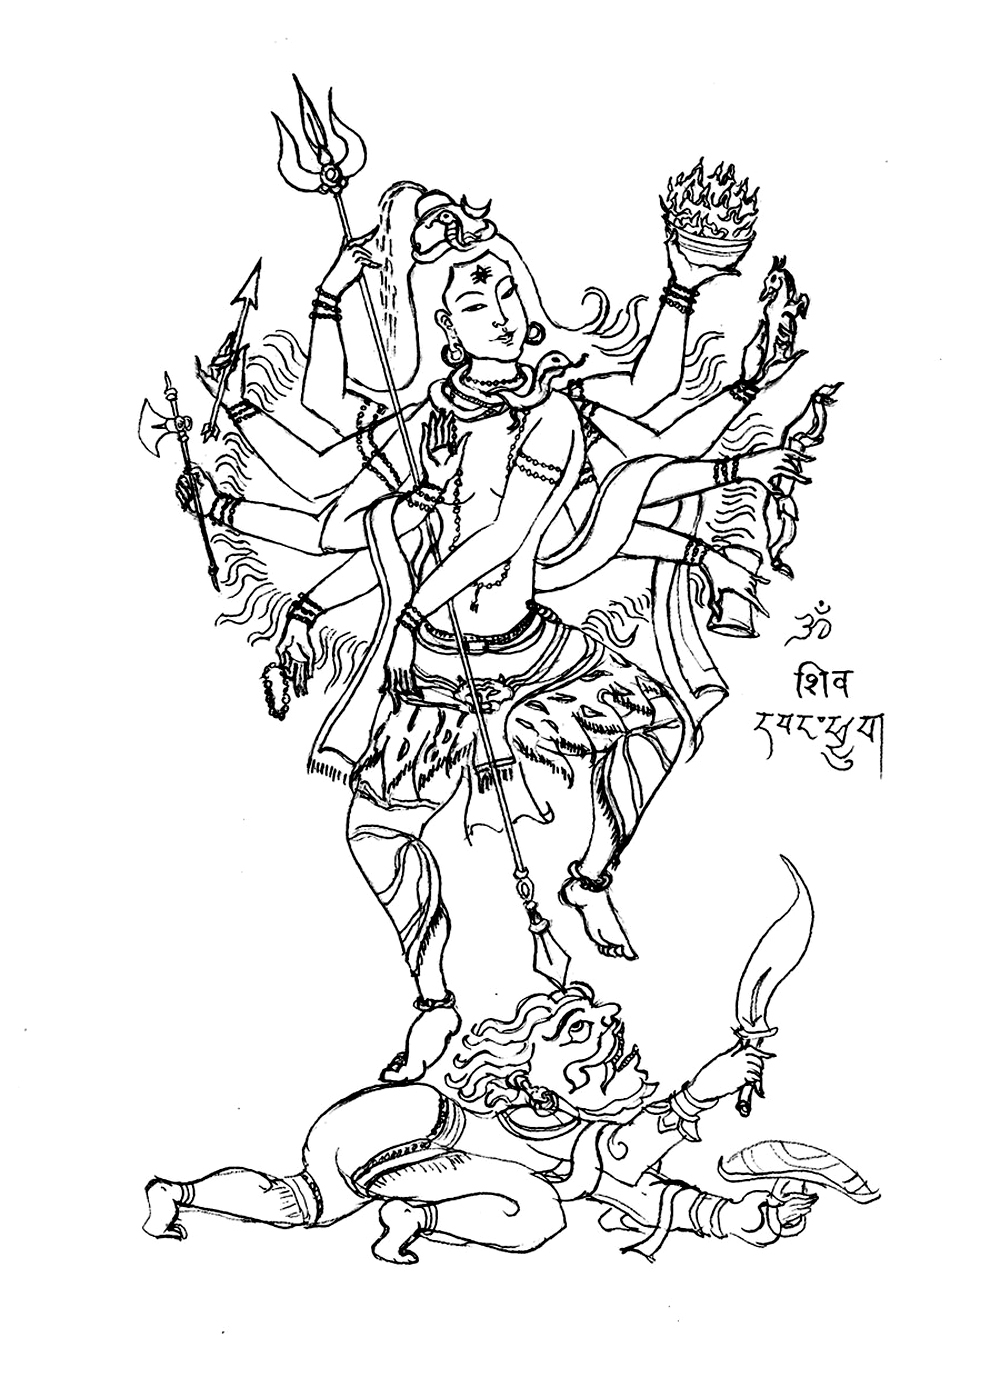 Coloring page of Shiva, the 8 arms' God, creator of the world in the Hindu culture